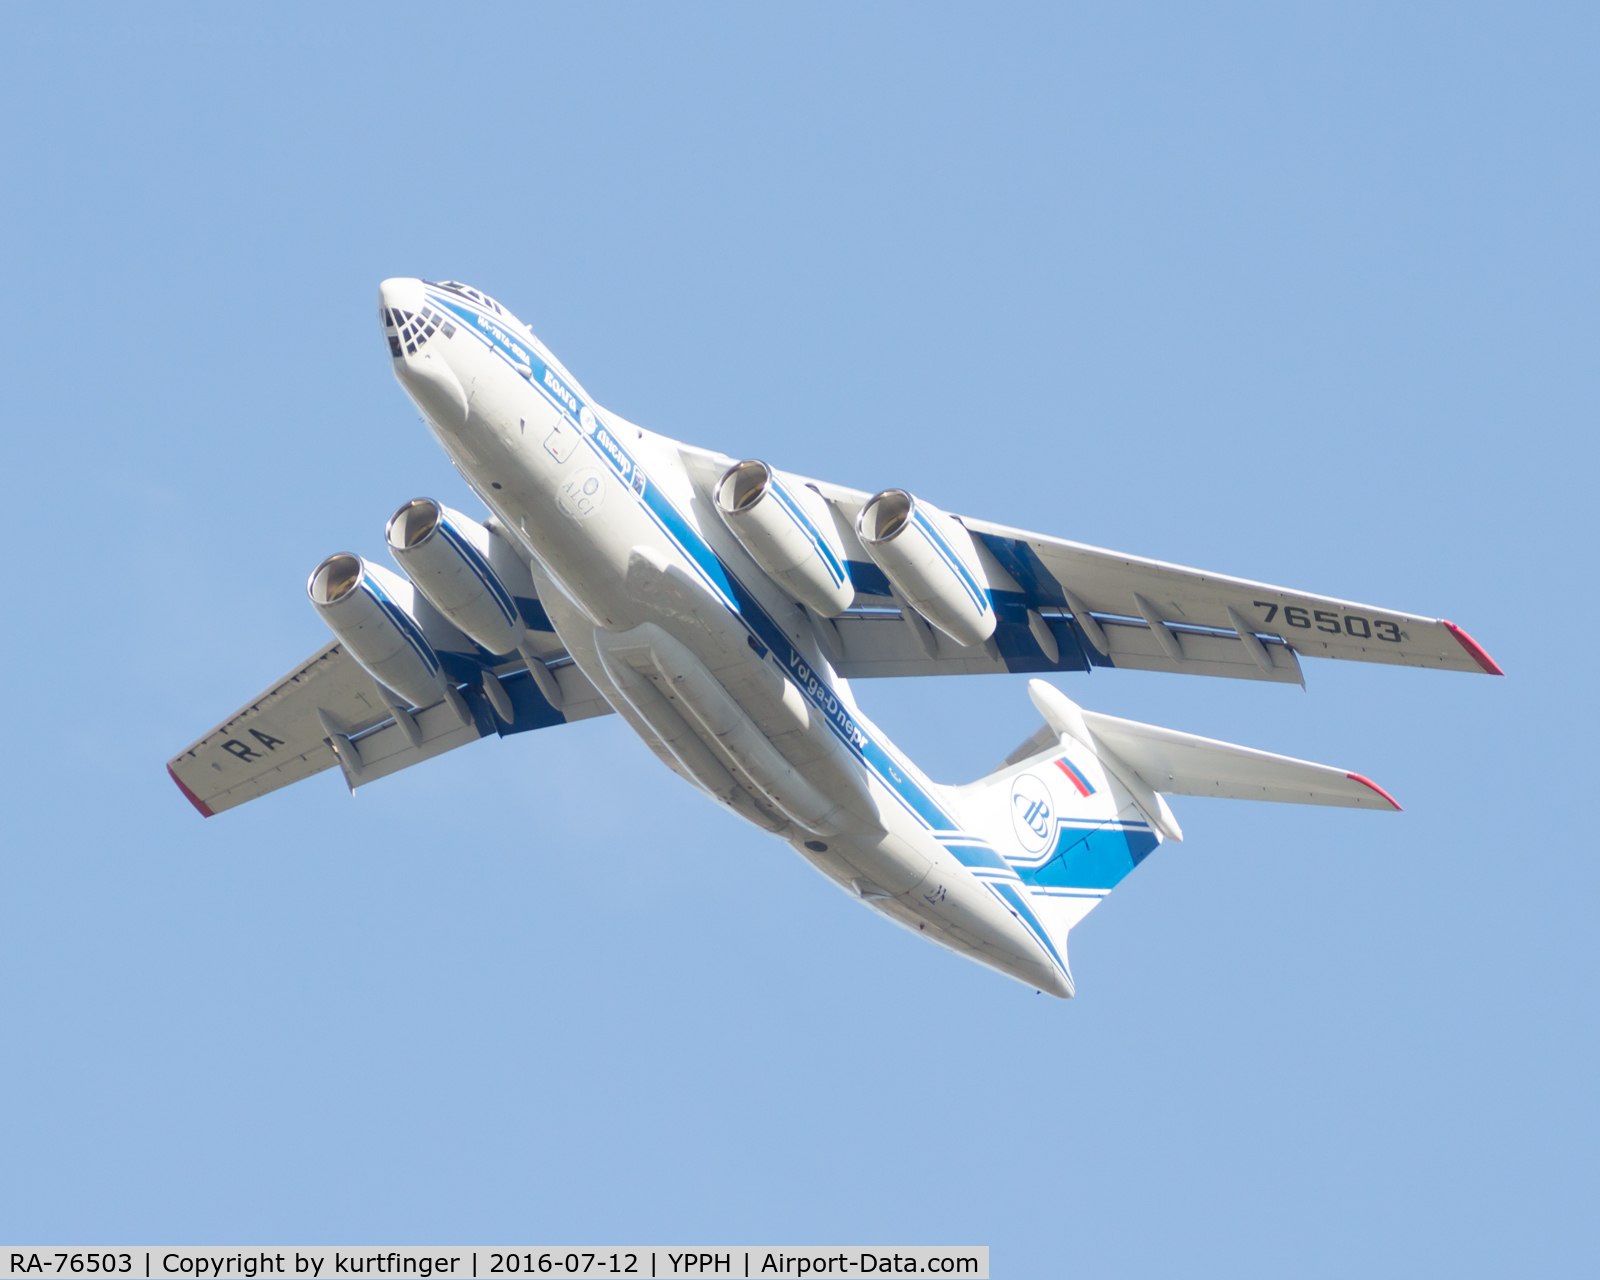 RA-76503, 2011 Ilyushin IL-76TD-90VD C/N 2093422748, The photo was taken approximately 3 km from the end of runway 03, YPPH.